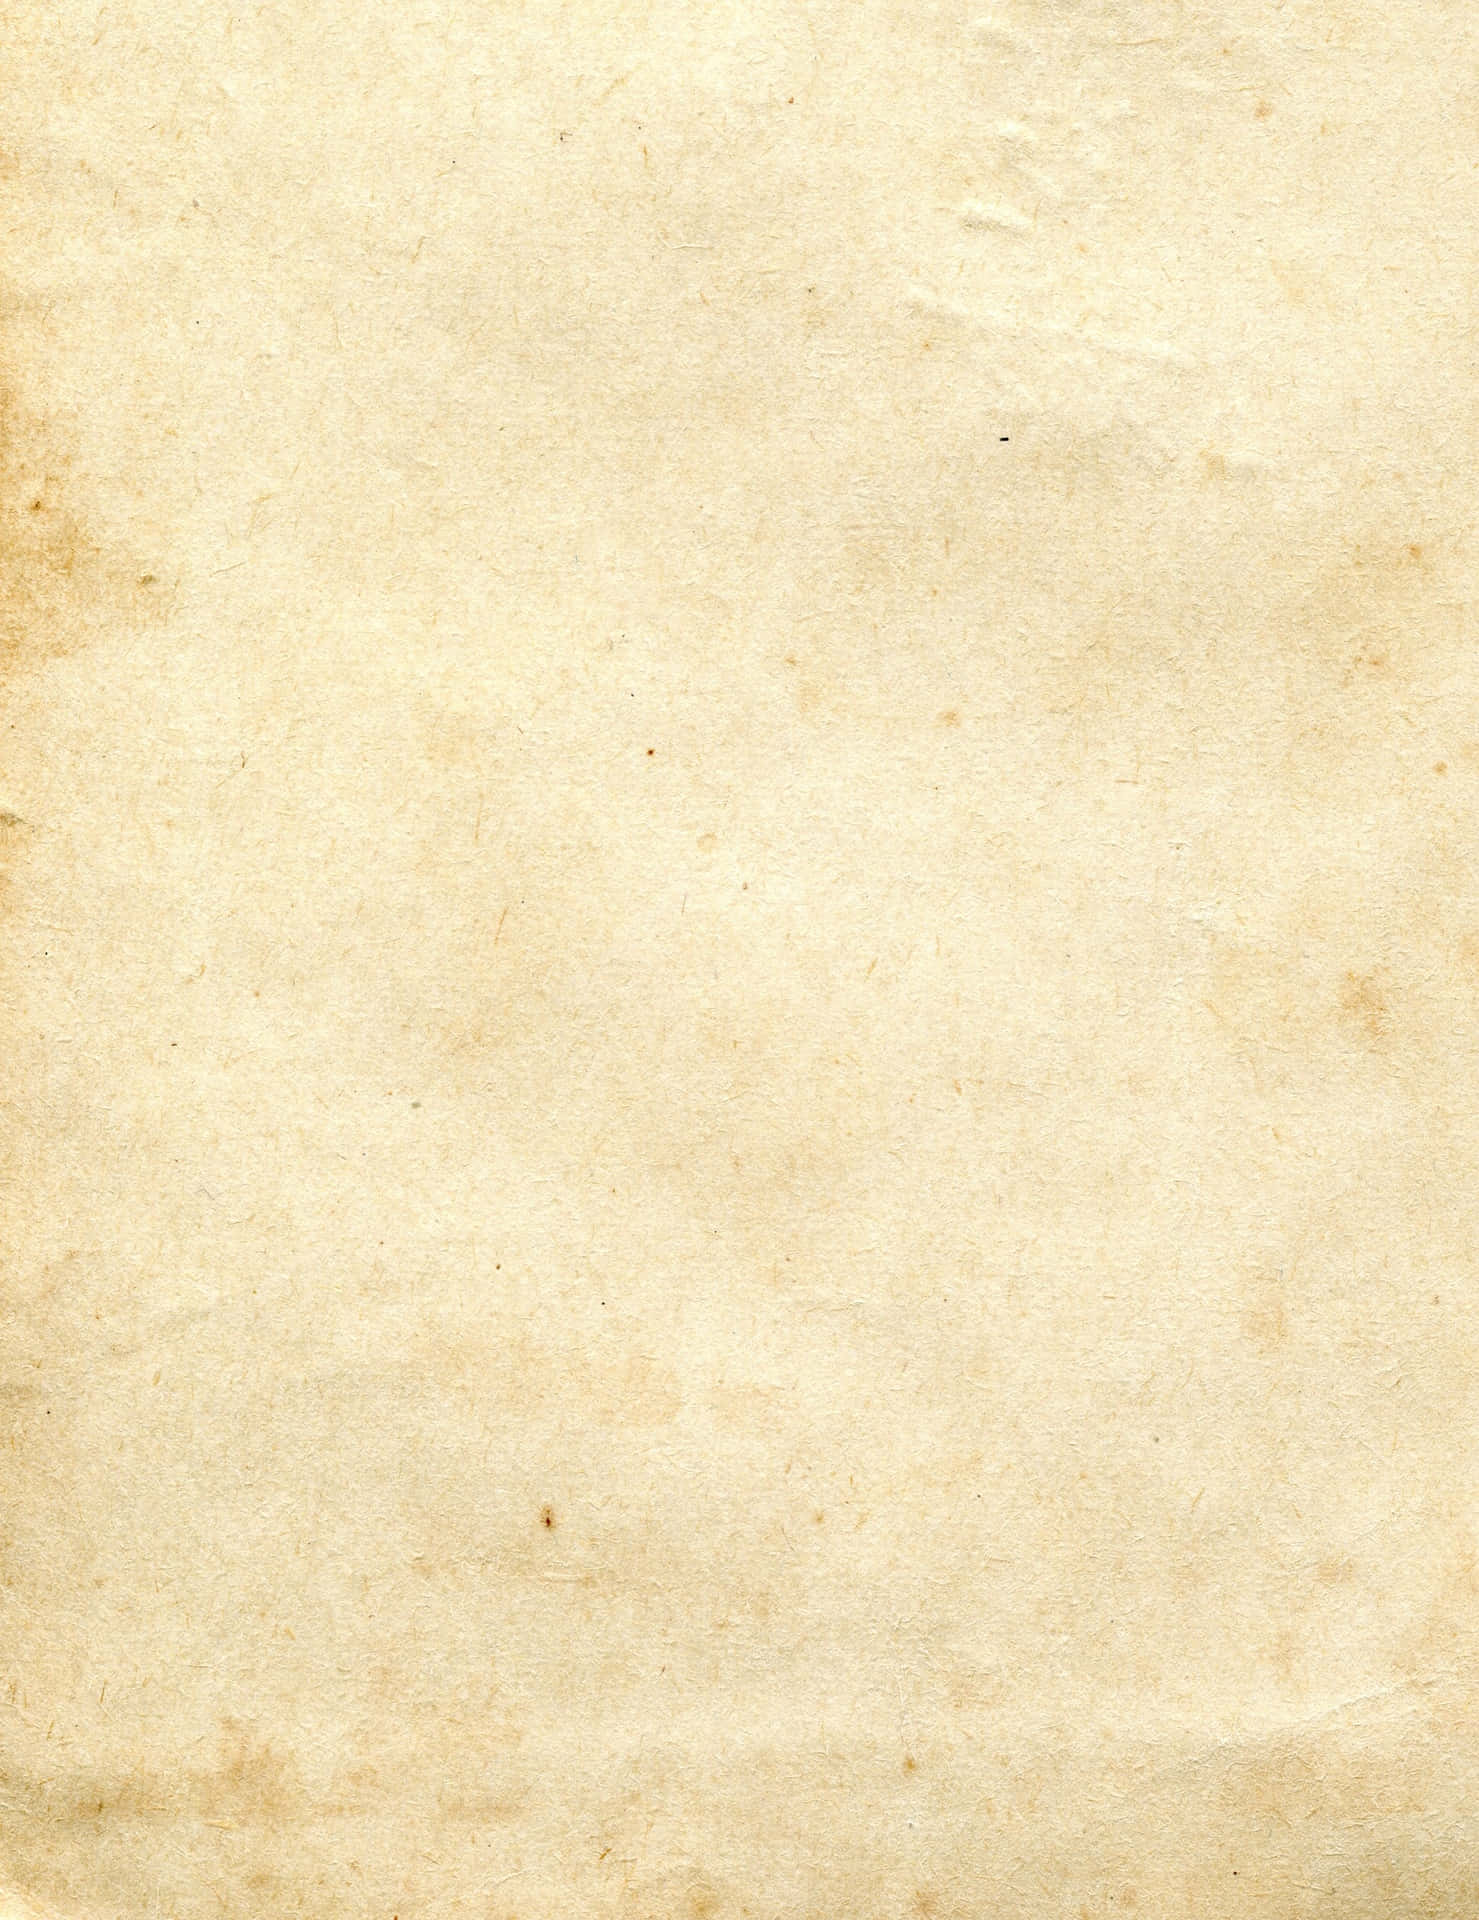 Authentic Old Paper Texture Background